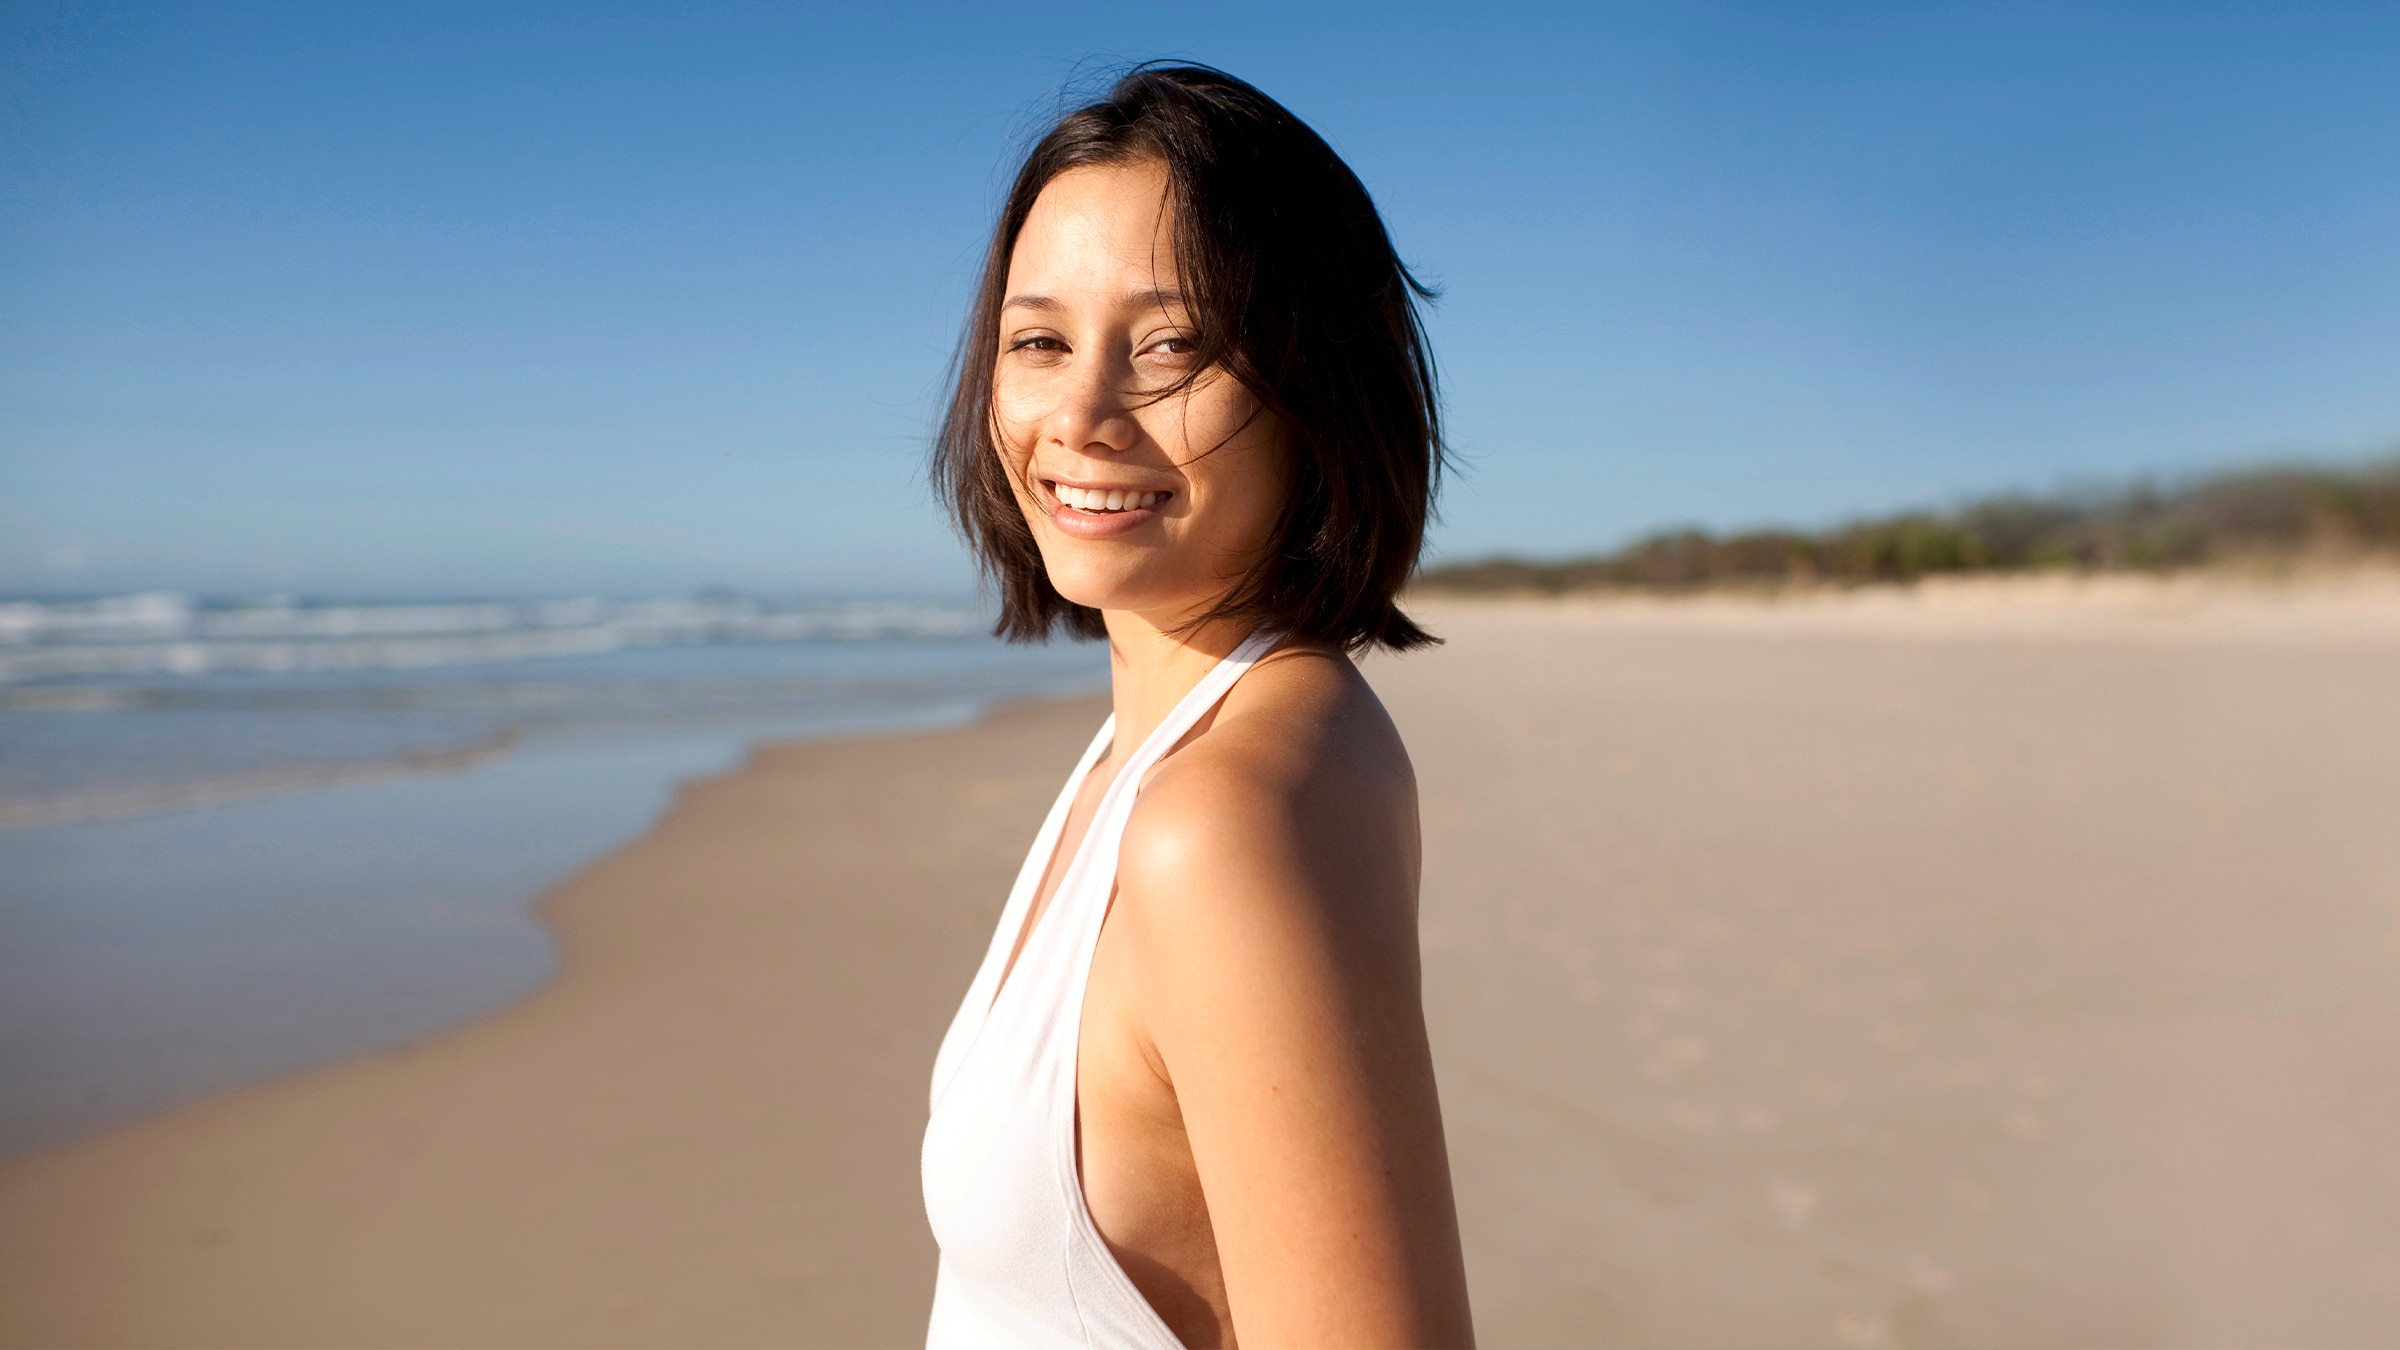 woman posing in front of the sea while smiling at the camera